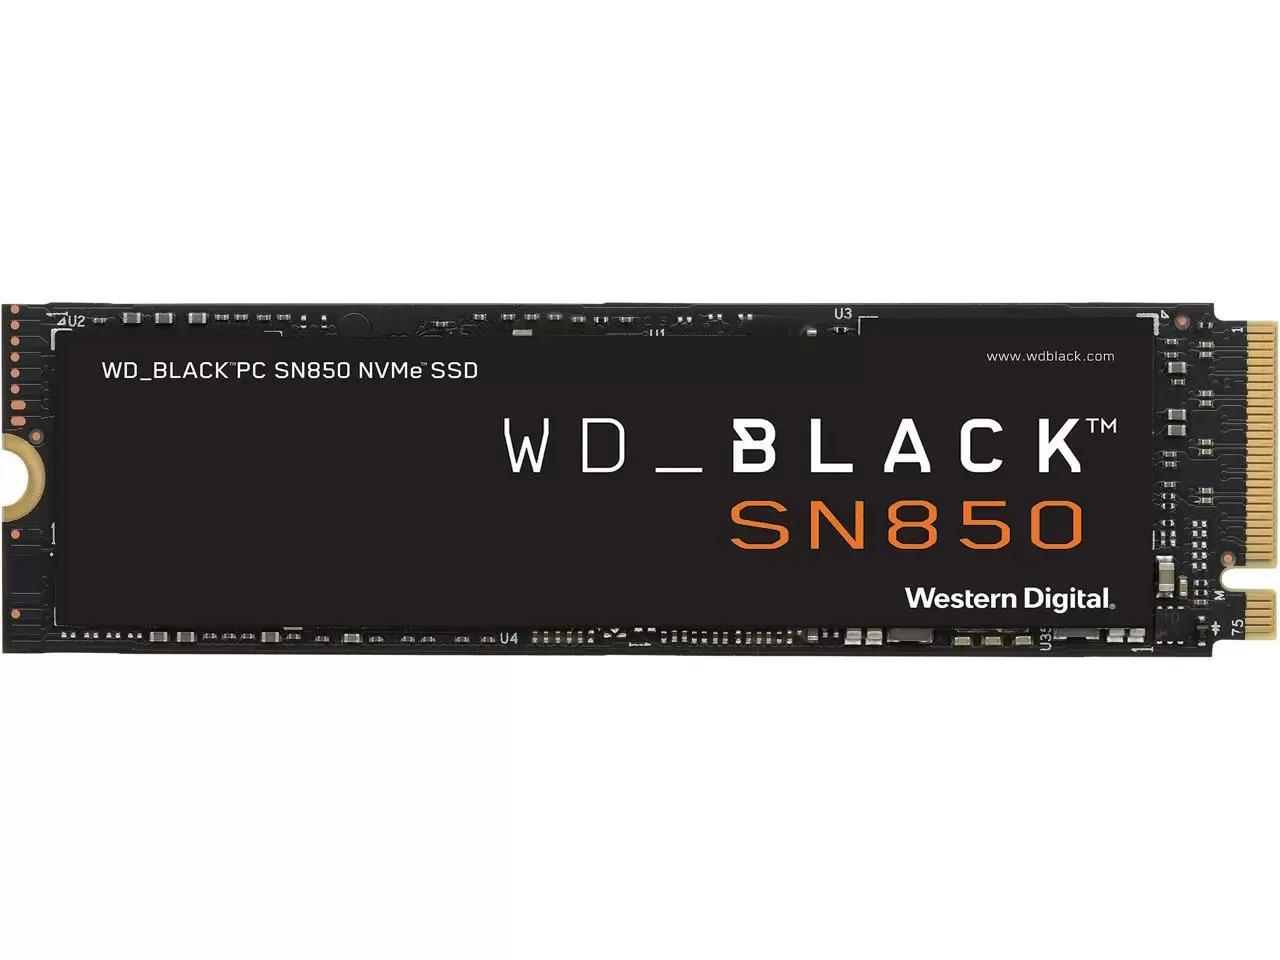 2TB WD Black SN850 NVMe SSD Solid State Drive for $270.99 Shipped